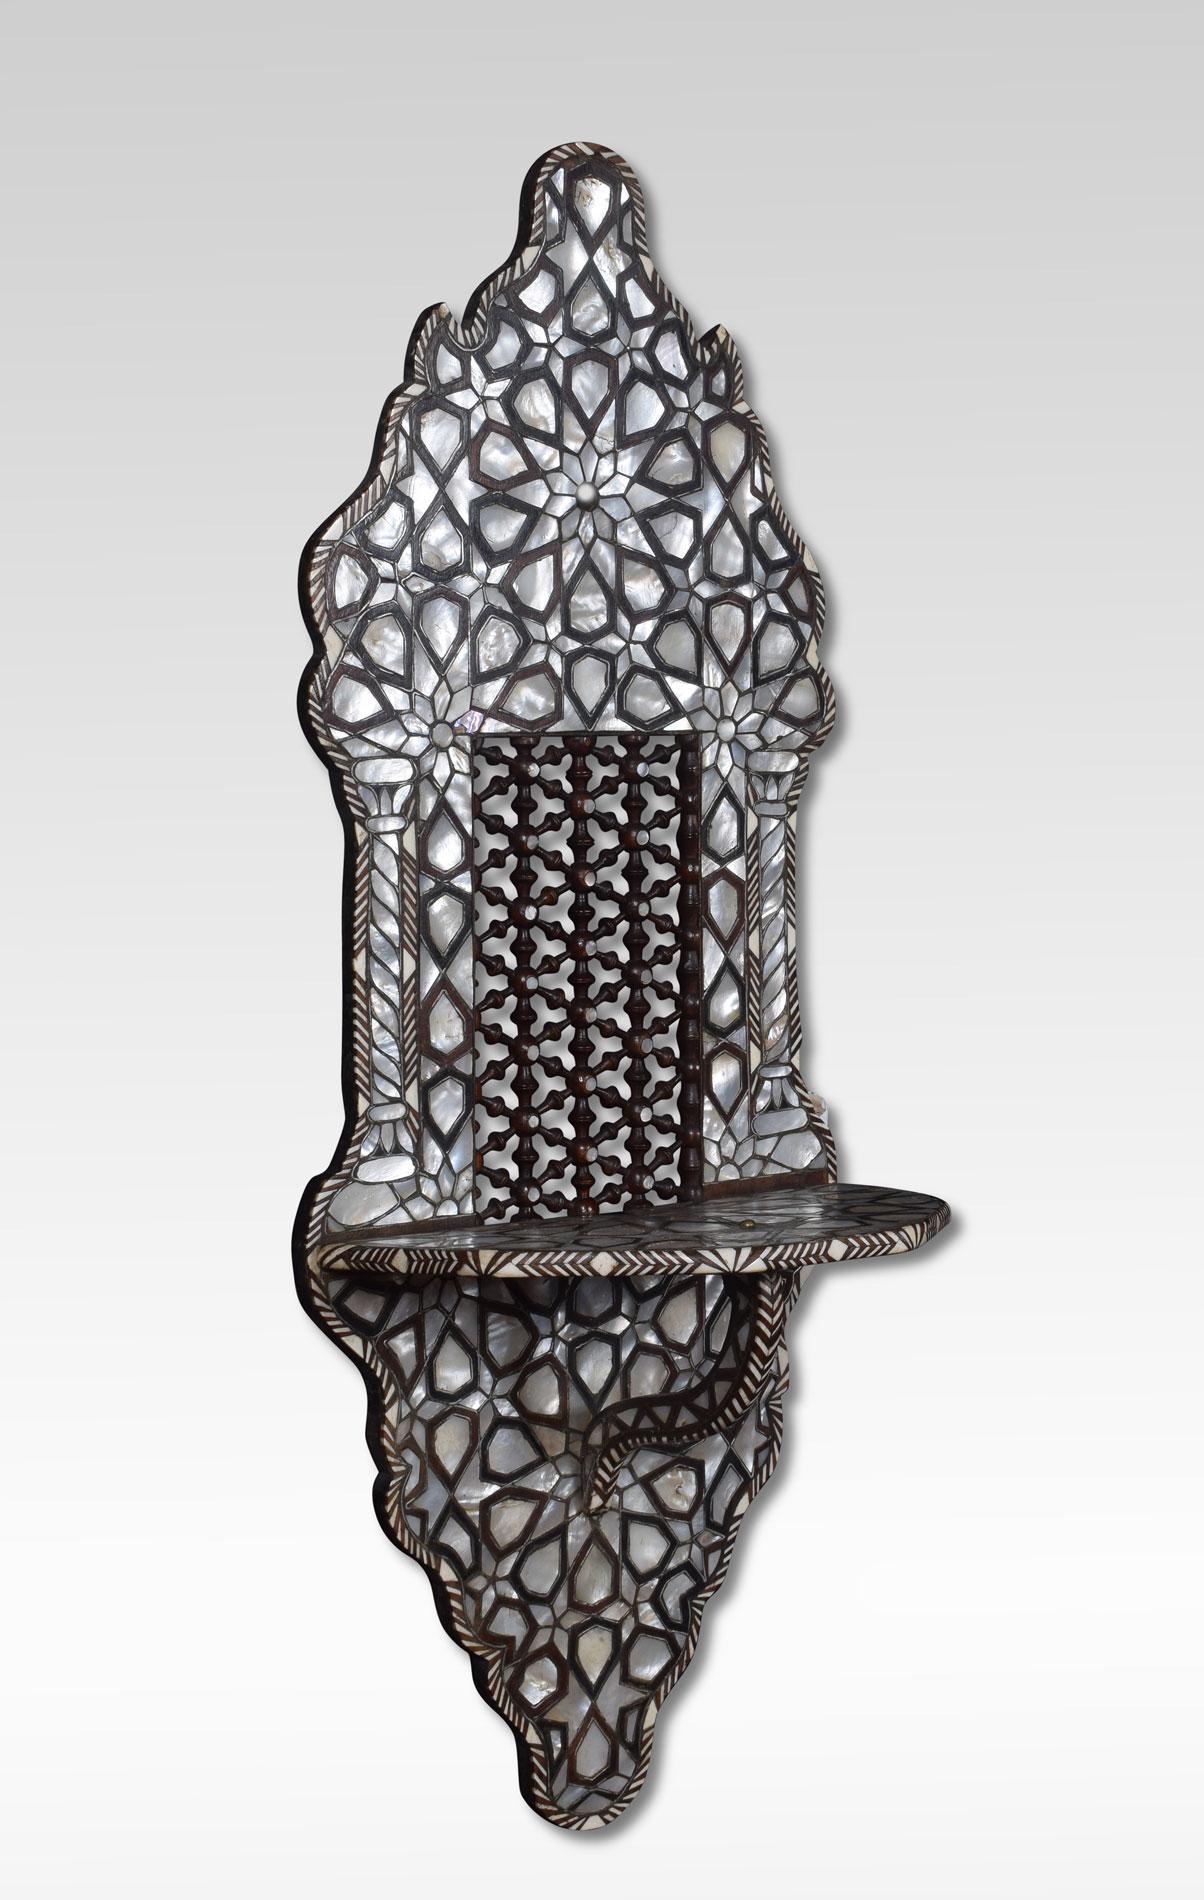 Ottoman wall bracket with geometric inlays of mother of pearl, bone, and exotic hardwoods. Having an architecturally intriguing form stick and ball panel, and ebonized shelf.
Dimensions:
Height 34.5 inches
Length 13.5 inches
Width 8 inches.